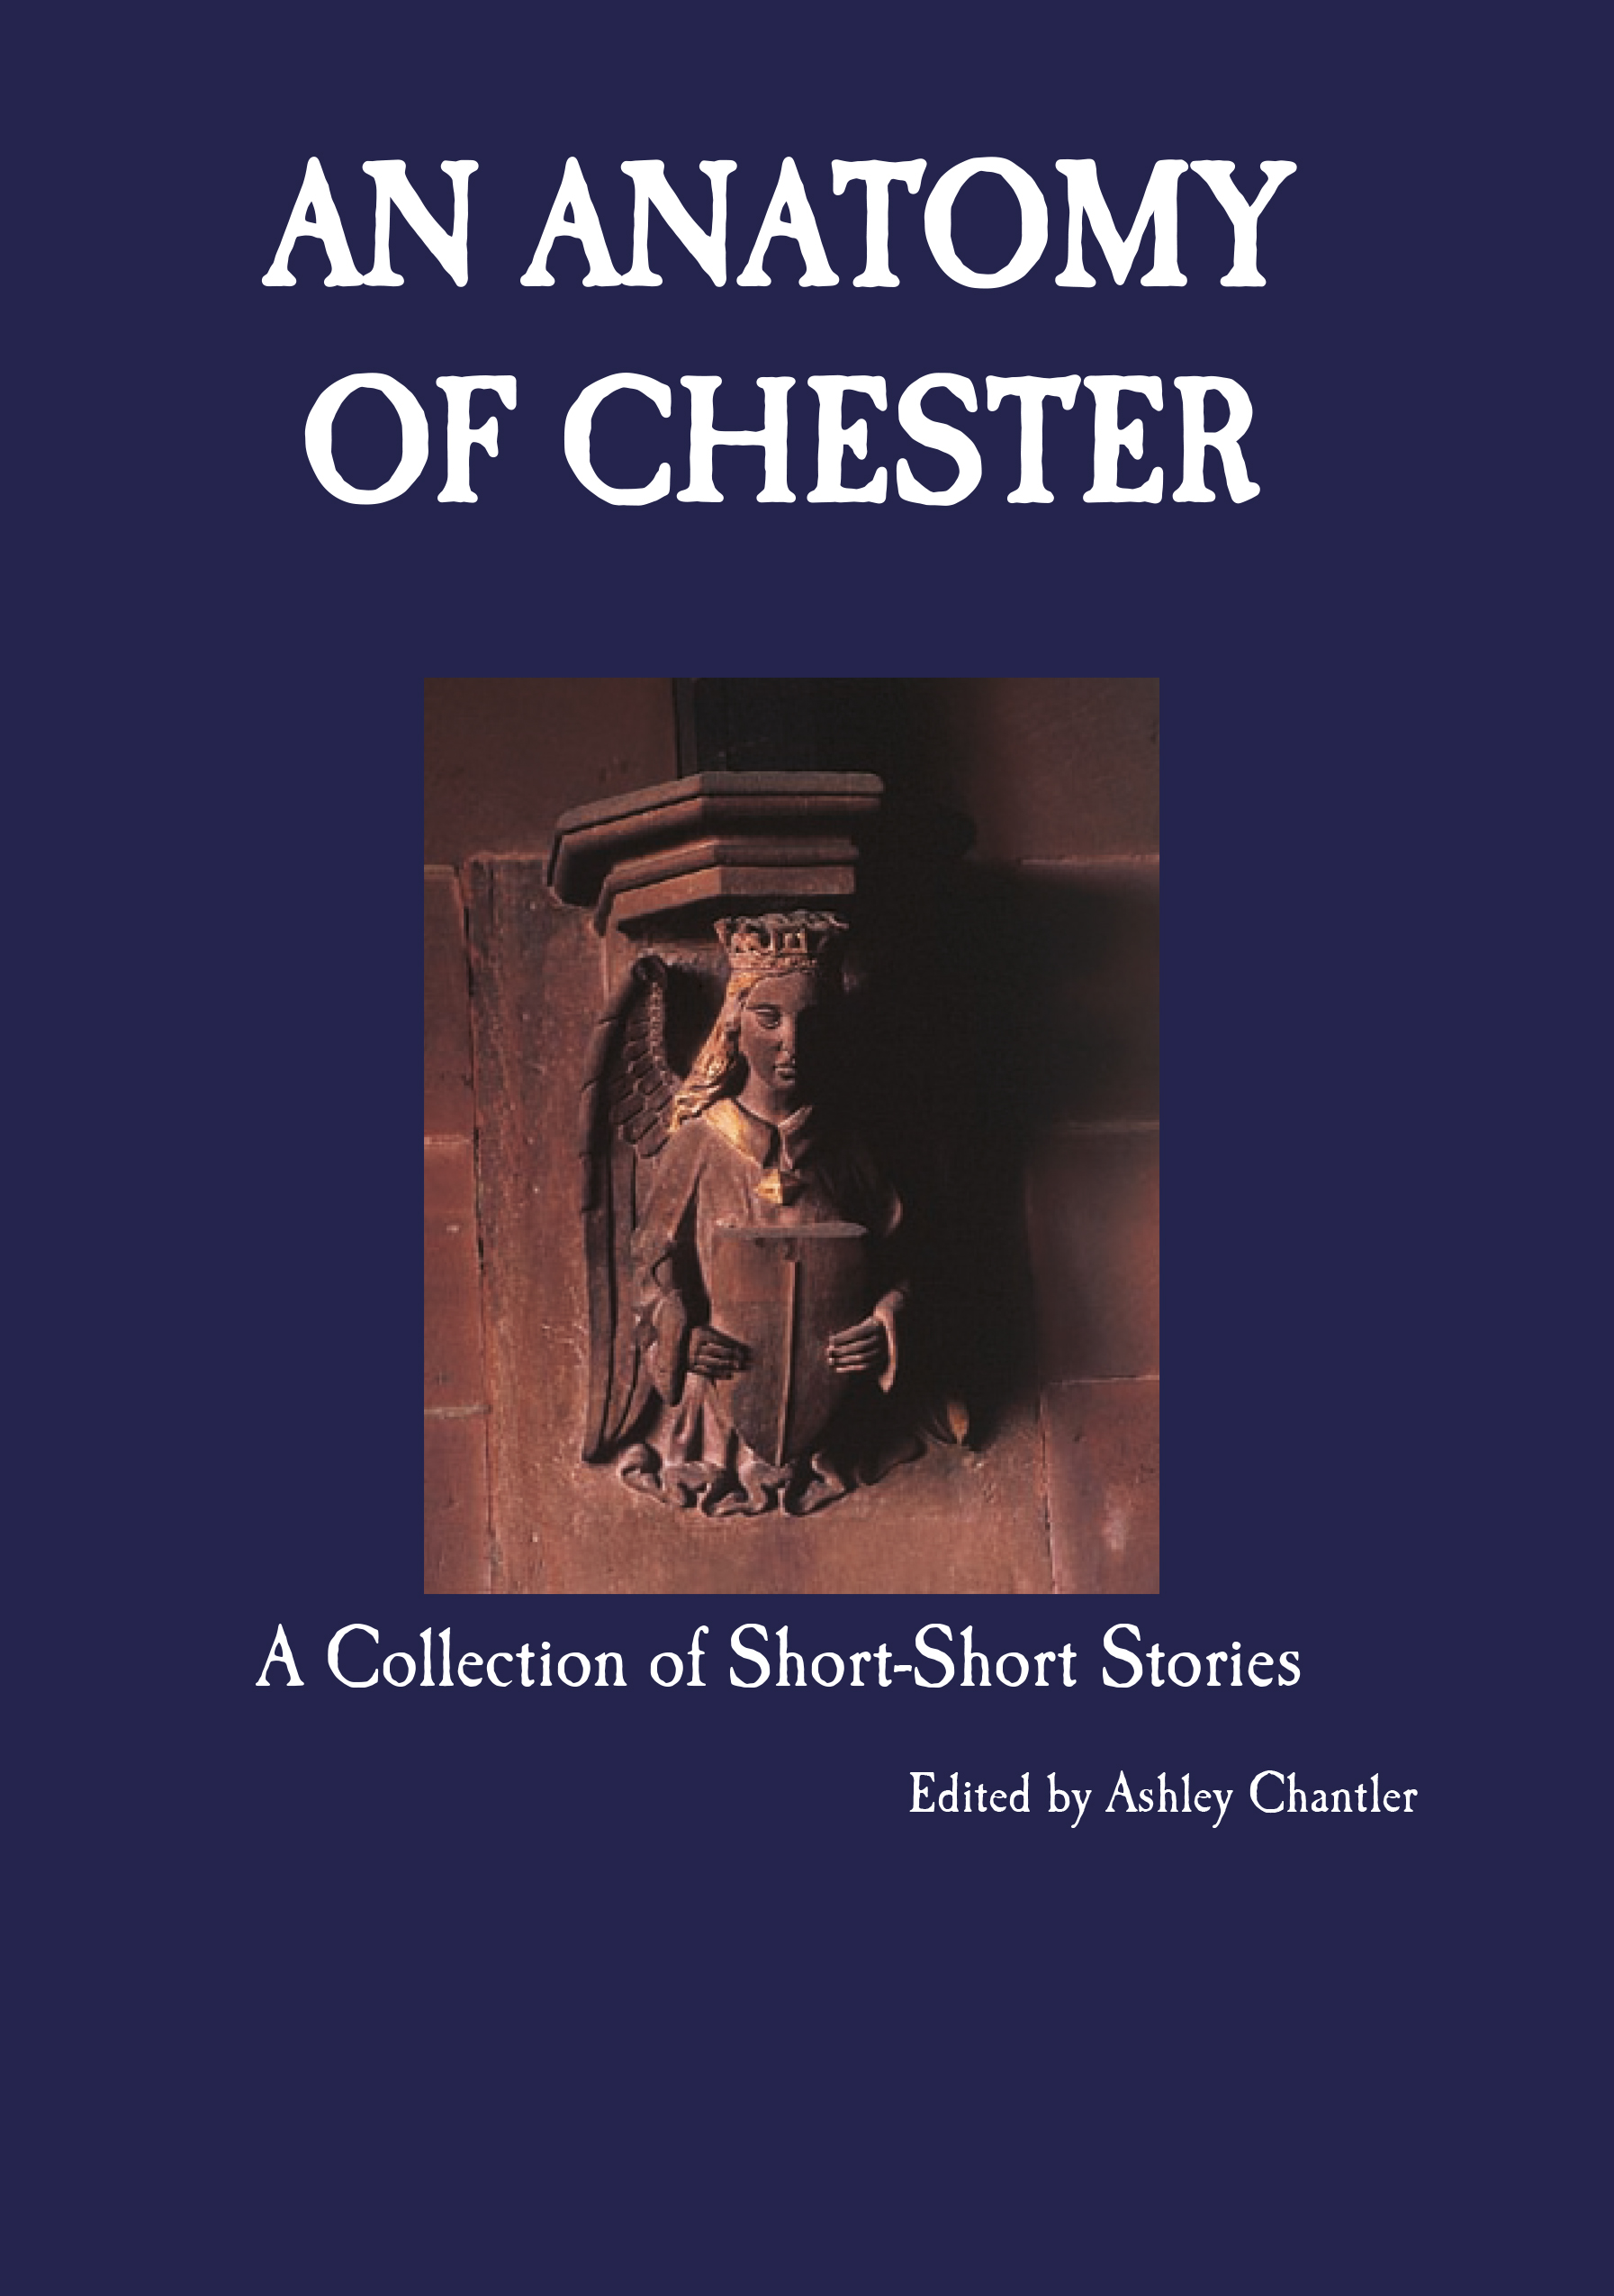 An Anatomy of Chester: A Collection of Short-Short Stories